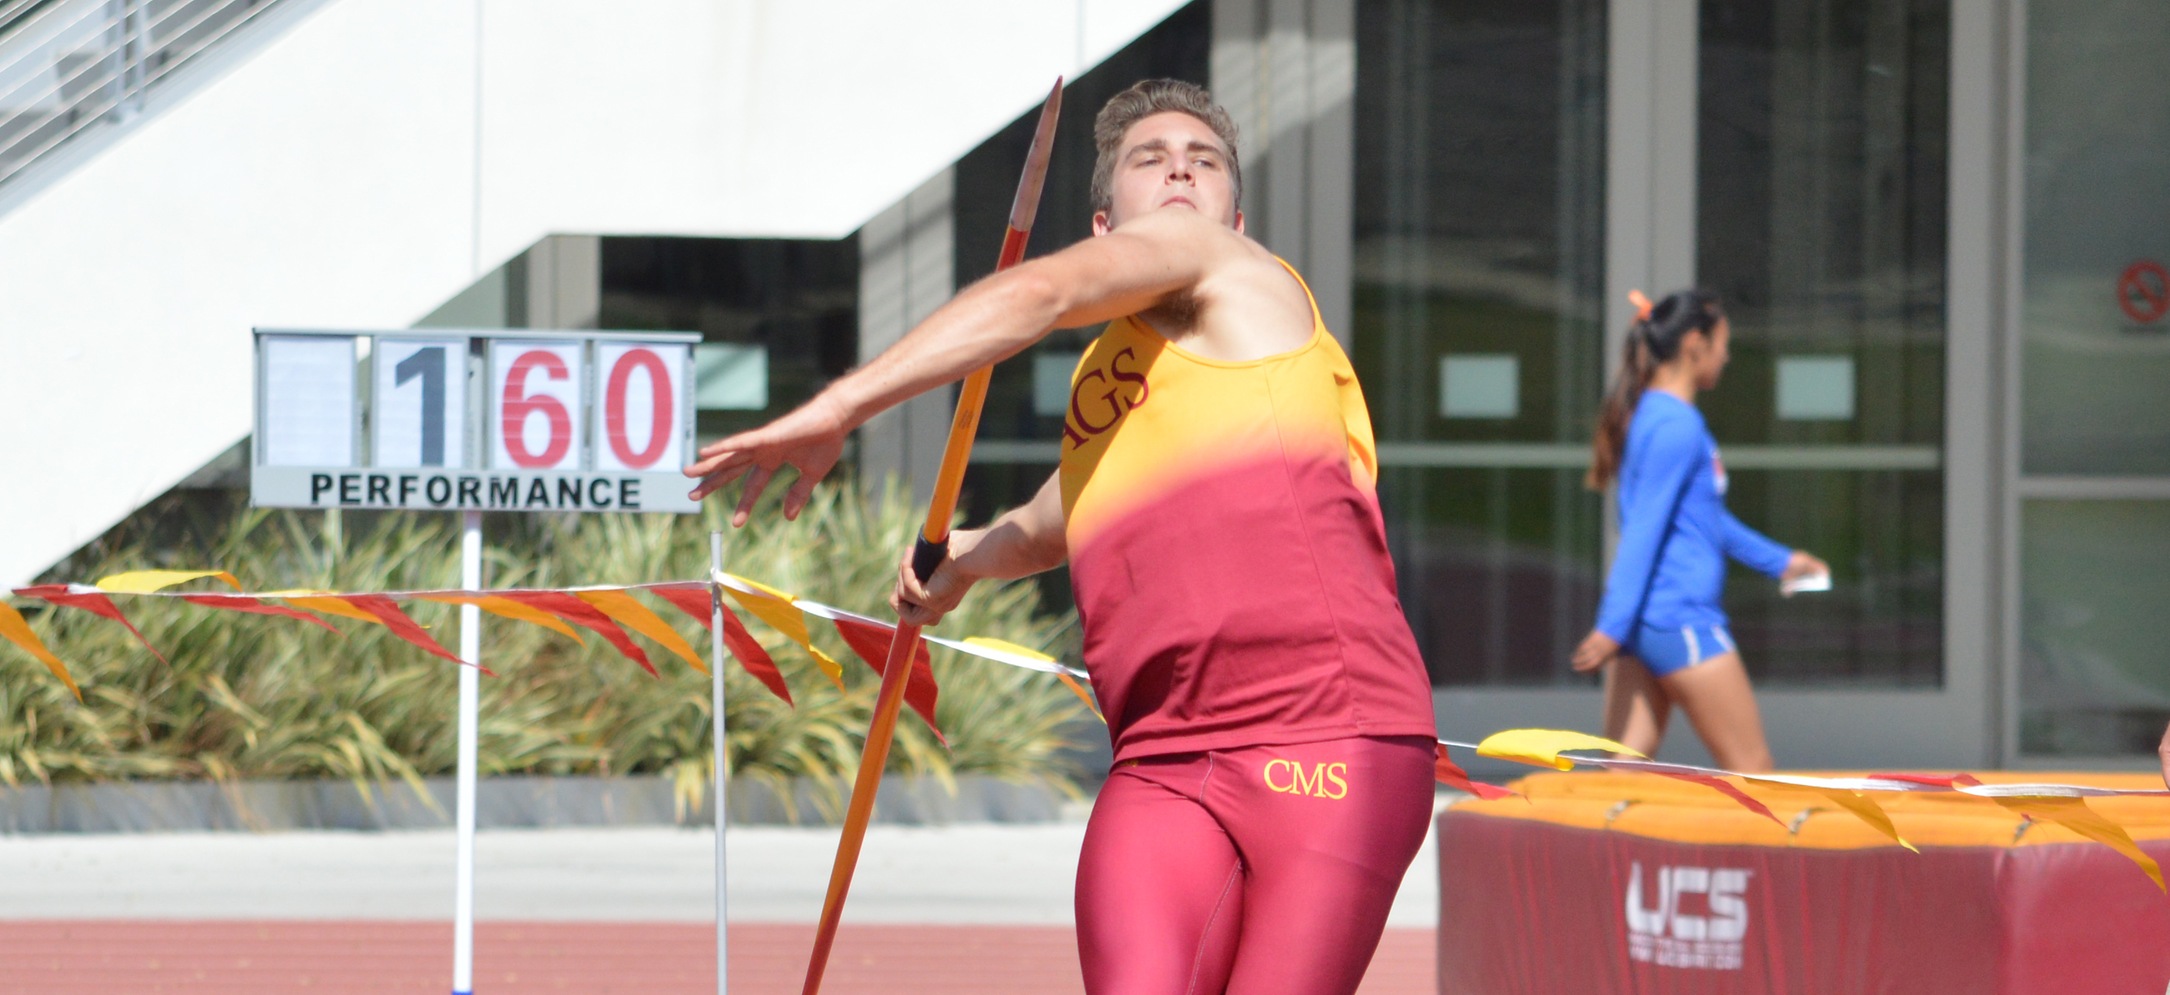 Connor Schulz (CMC) set a new personal record in the javelin throw. (photo credit: Hannah Graves)